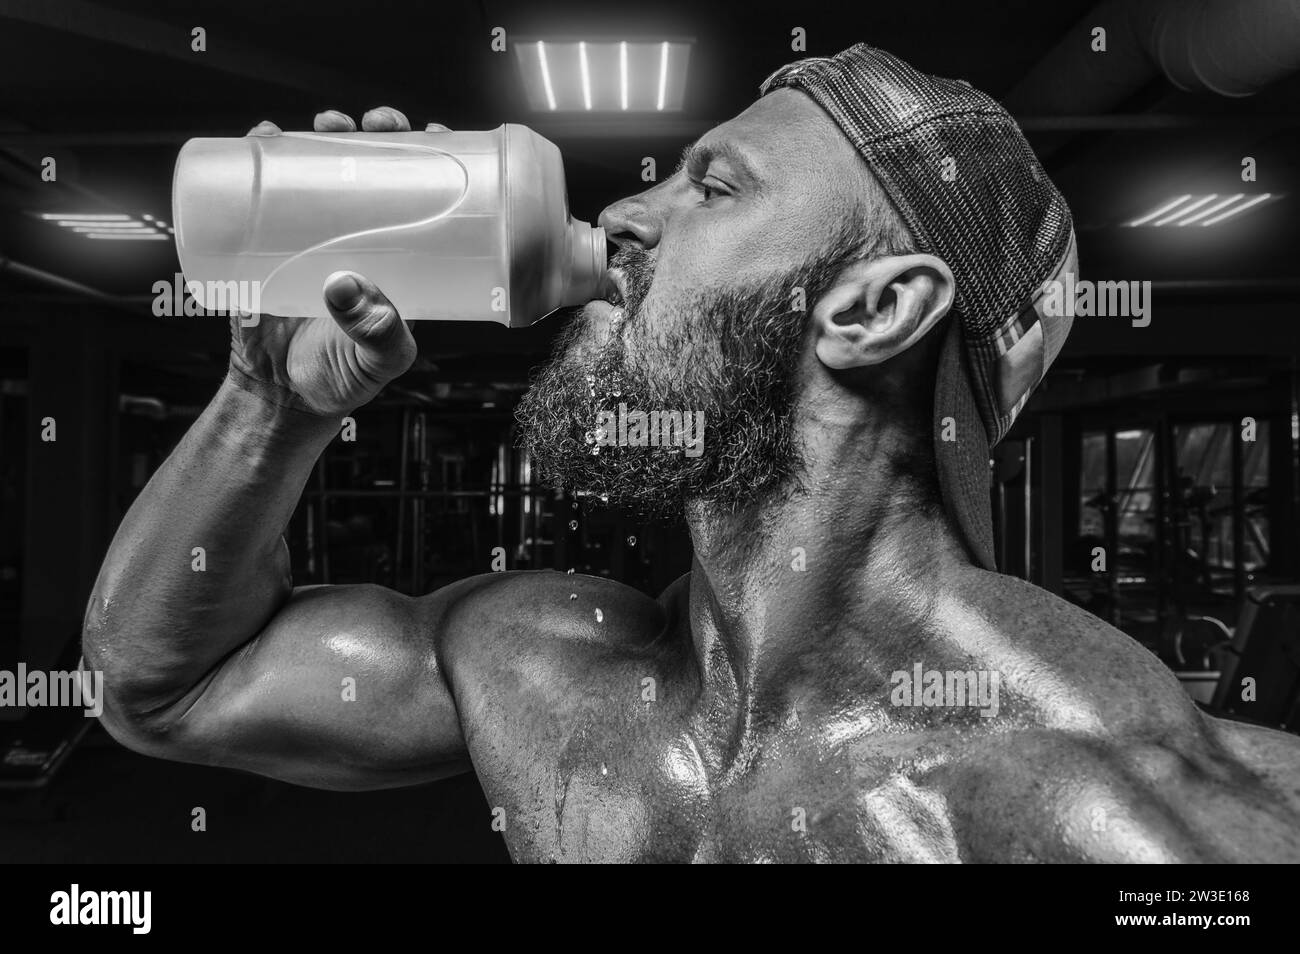 Muscular man in the gym drinking from a shaker. Fitness and bodybuilding concept. Mixed media Stock Photo